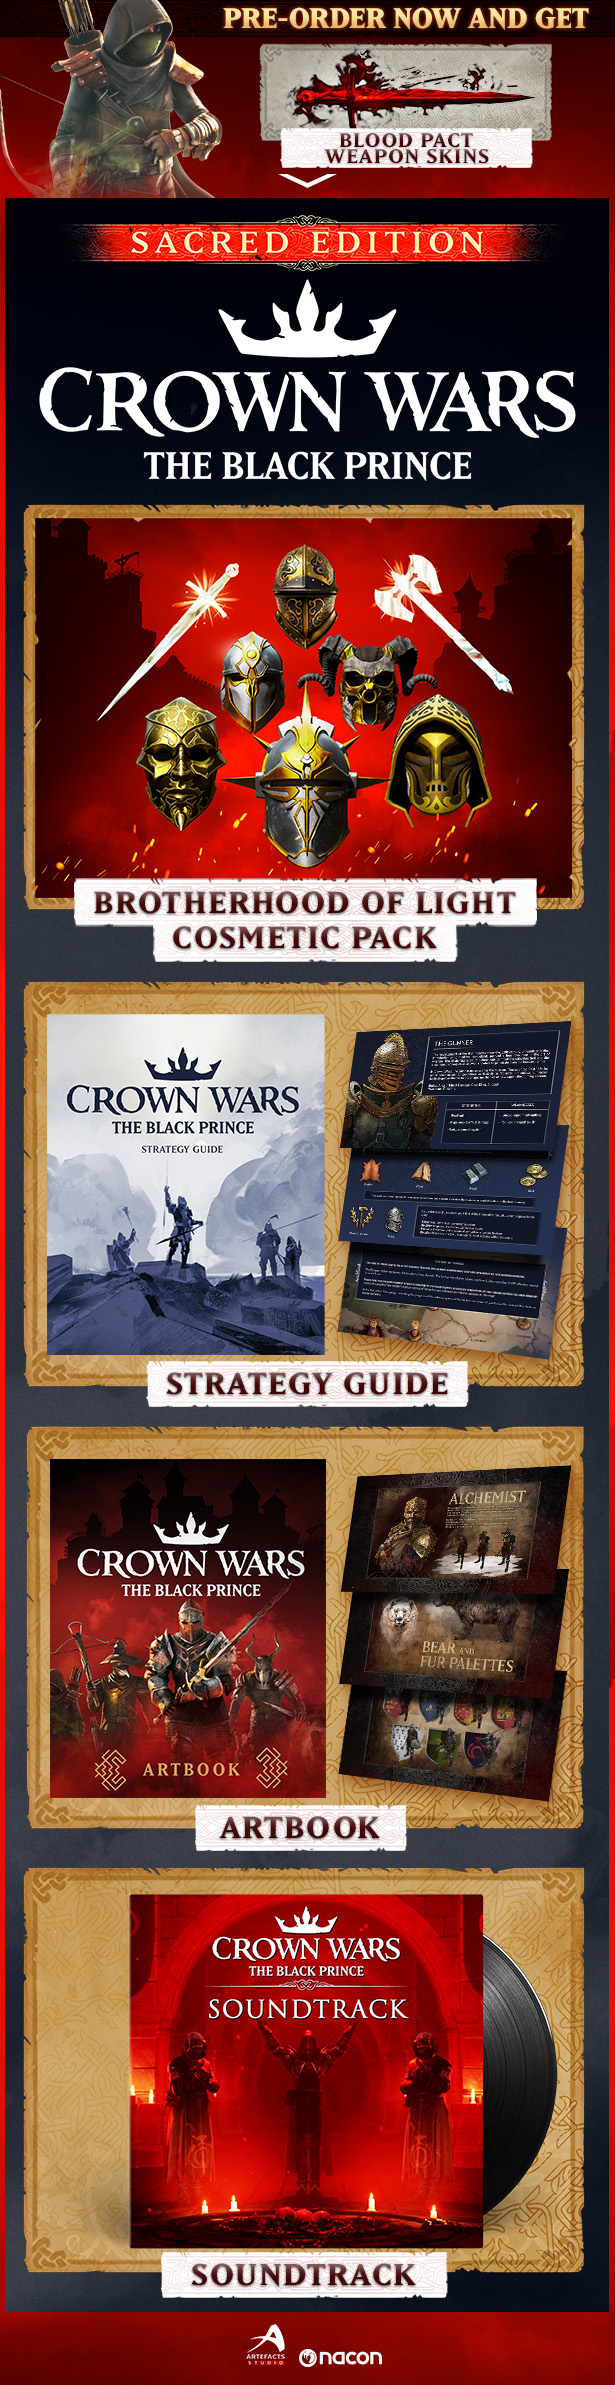 Pre-purchase Crown Wars: The Black Prince on Steam